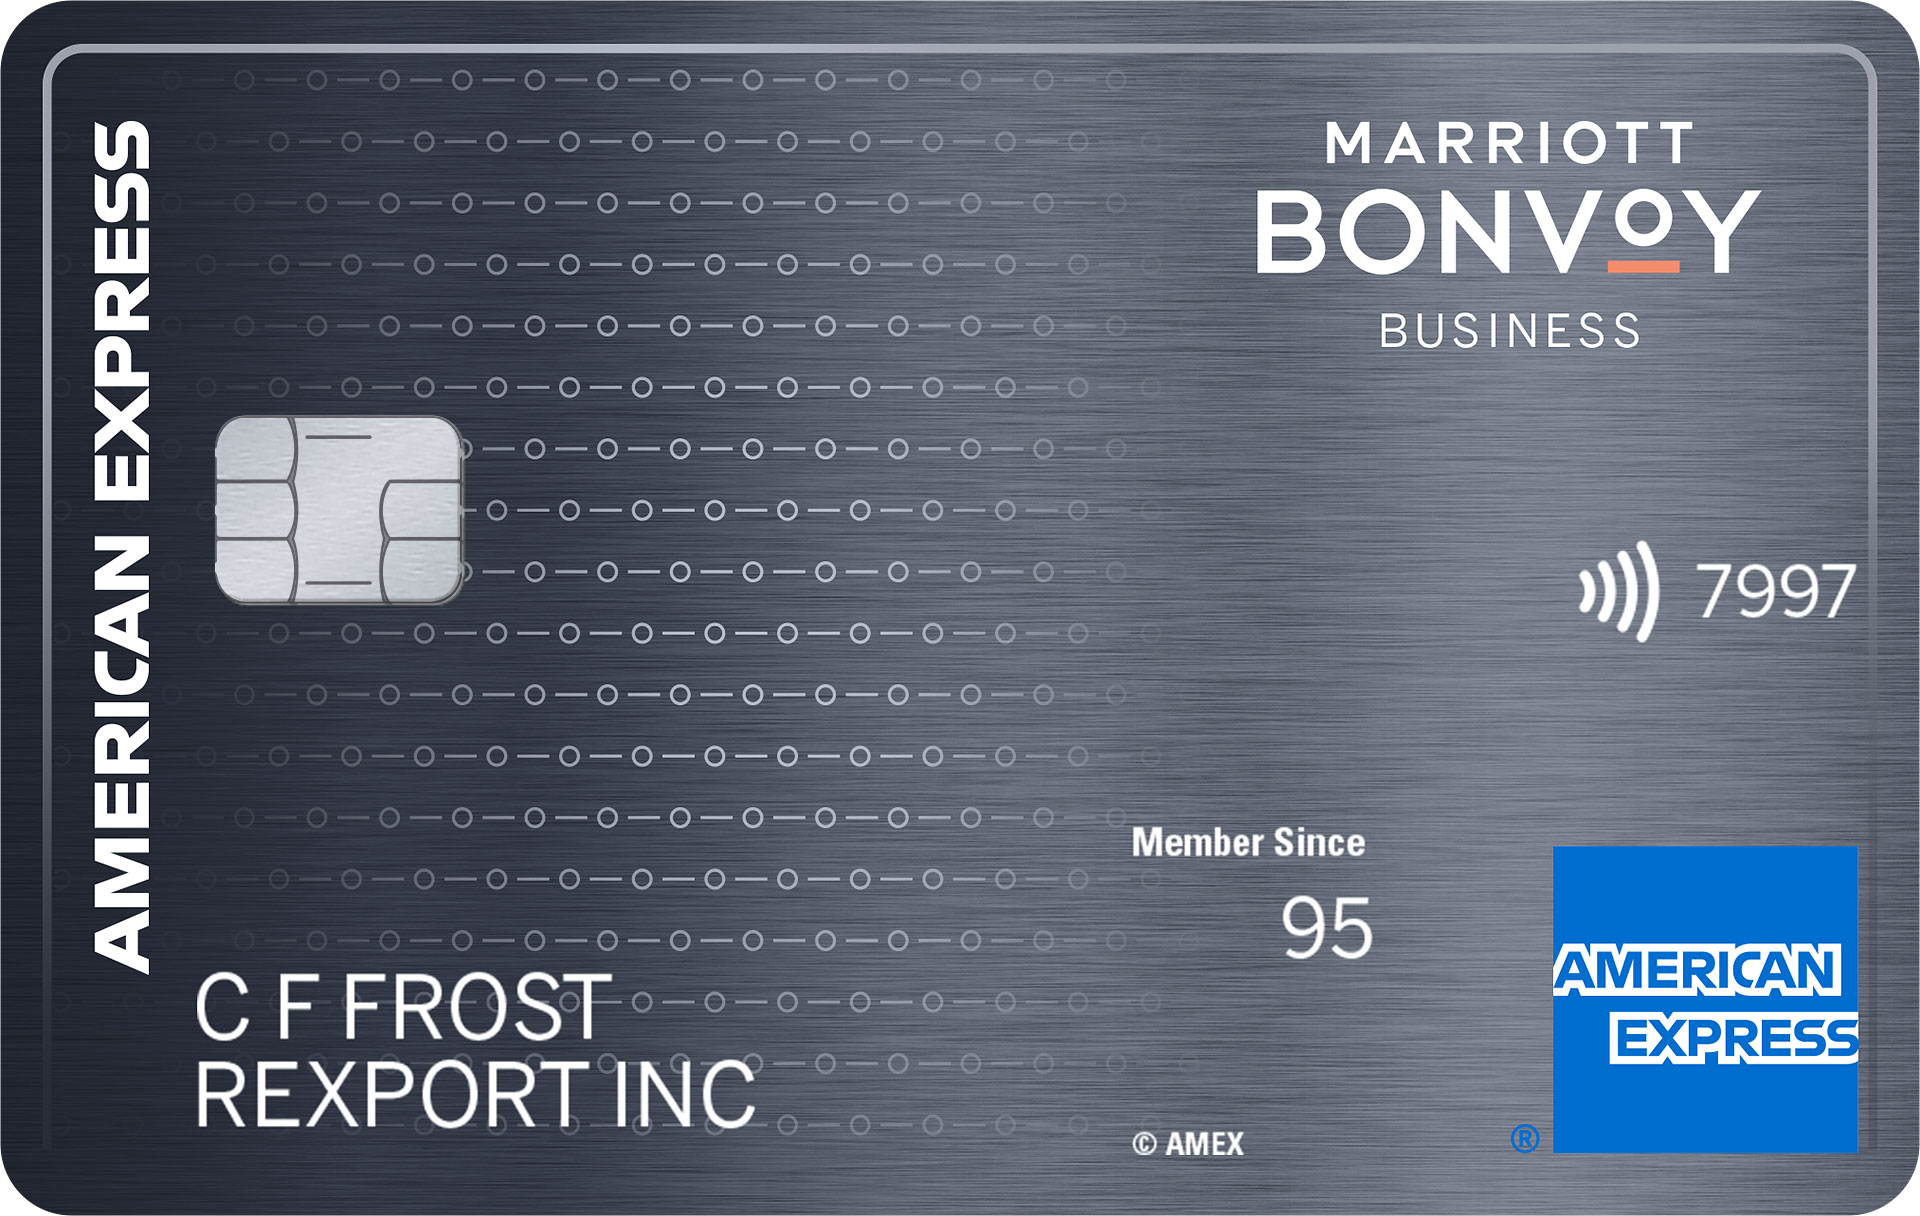 Marriott Bonvoy 100,000 Point Credit Card Offers are Here!